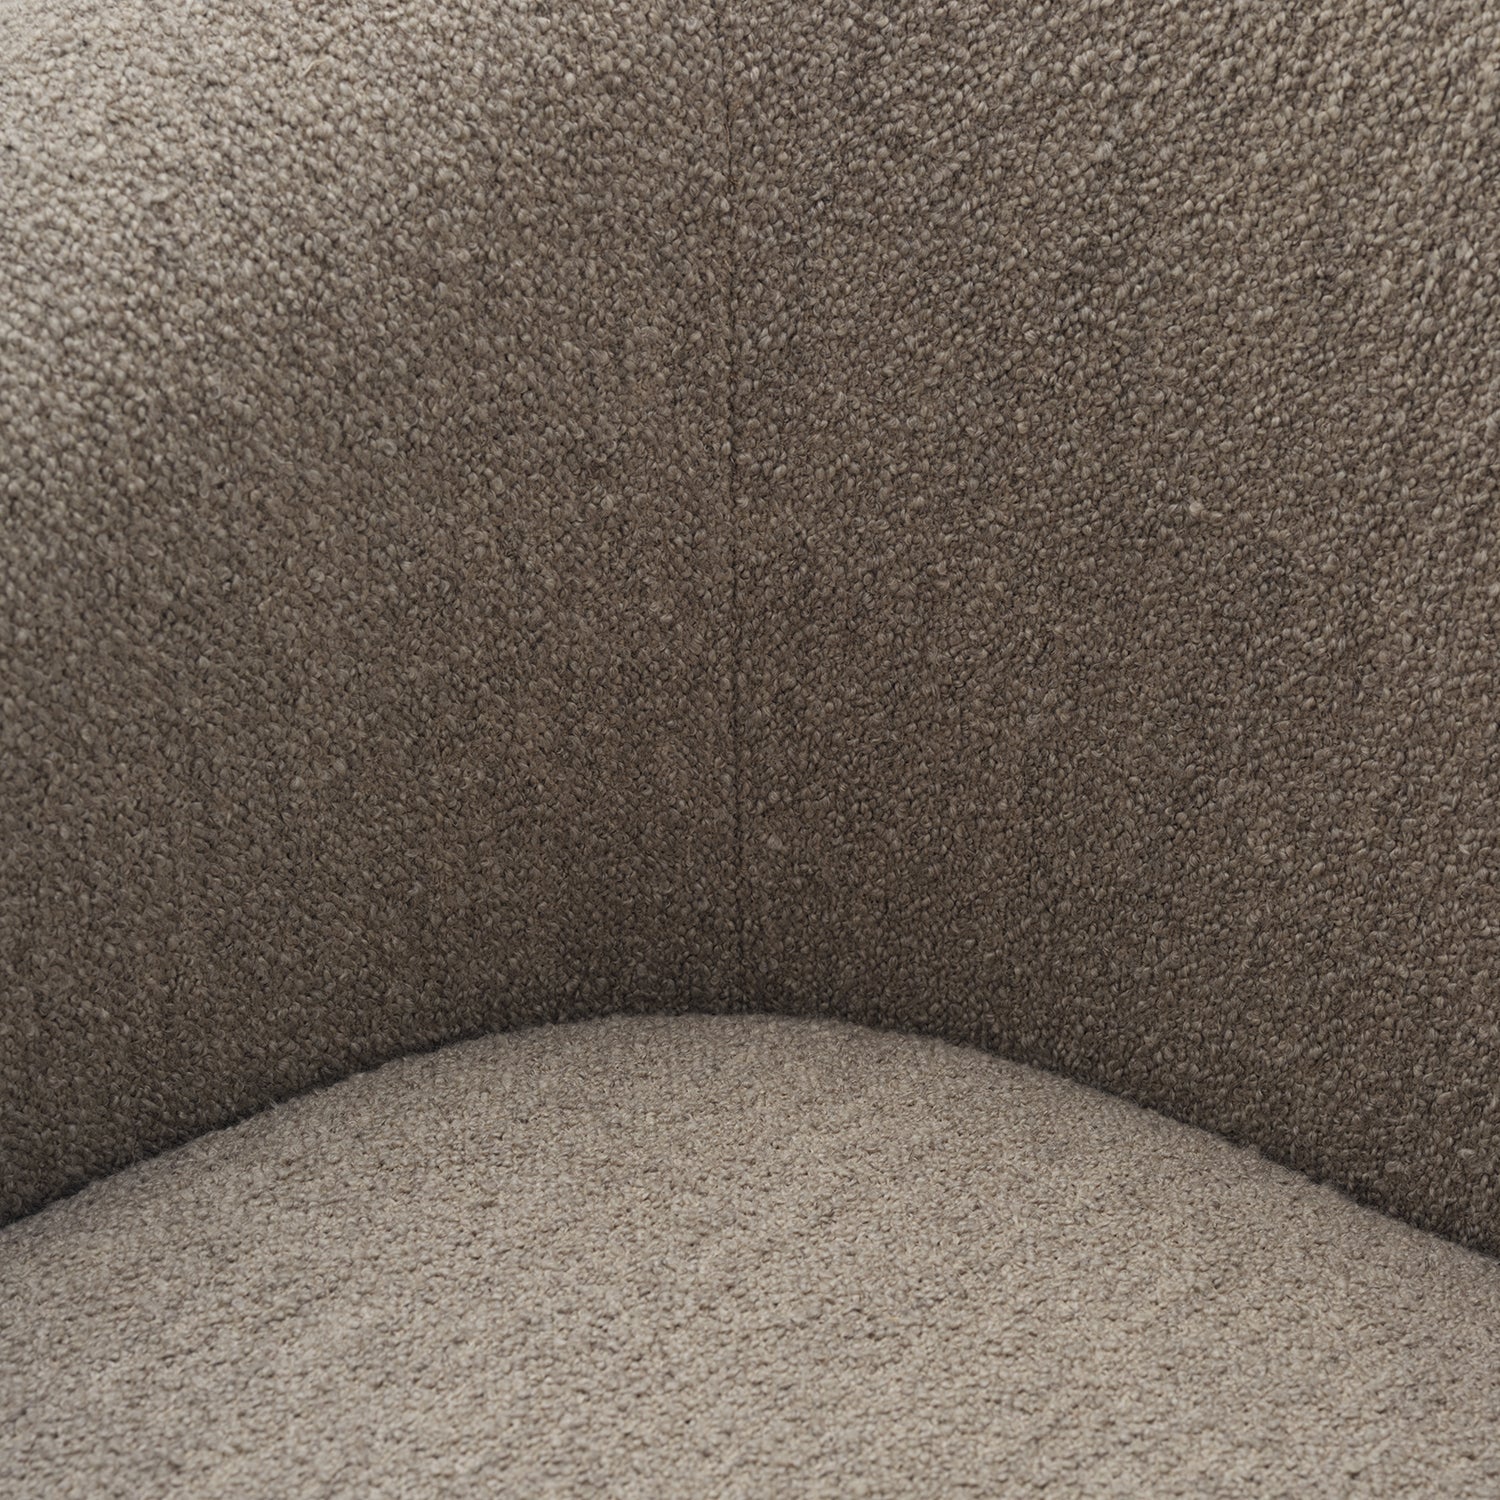 New Works Covent Club Chair in hemp, close up